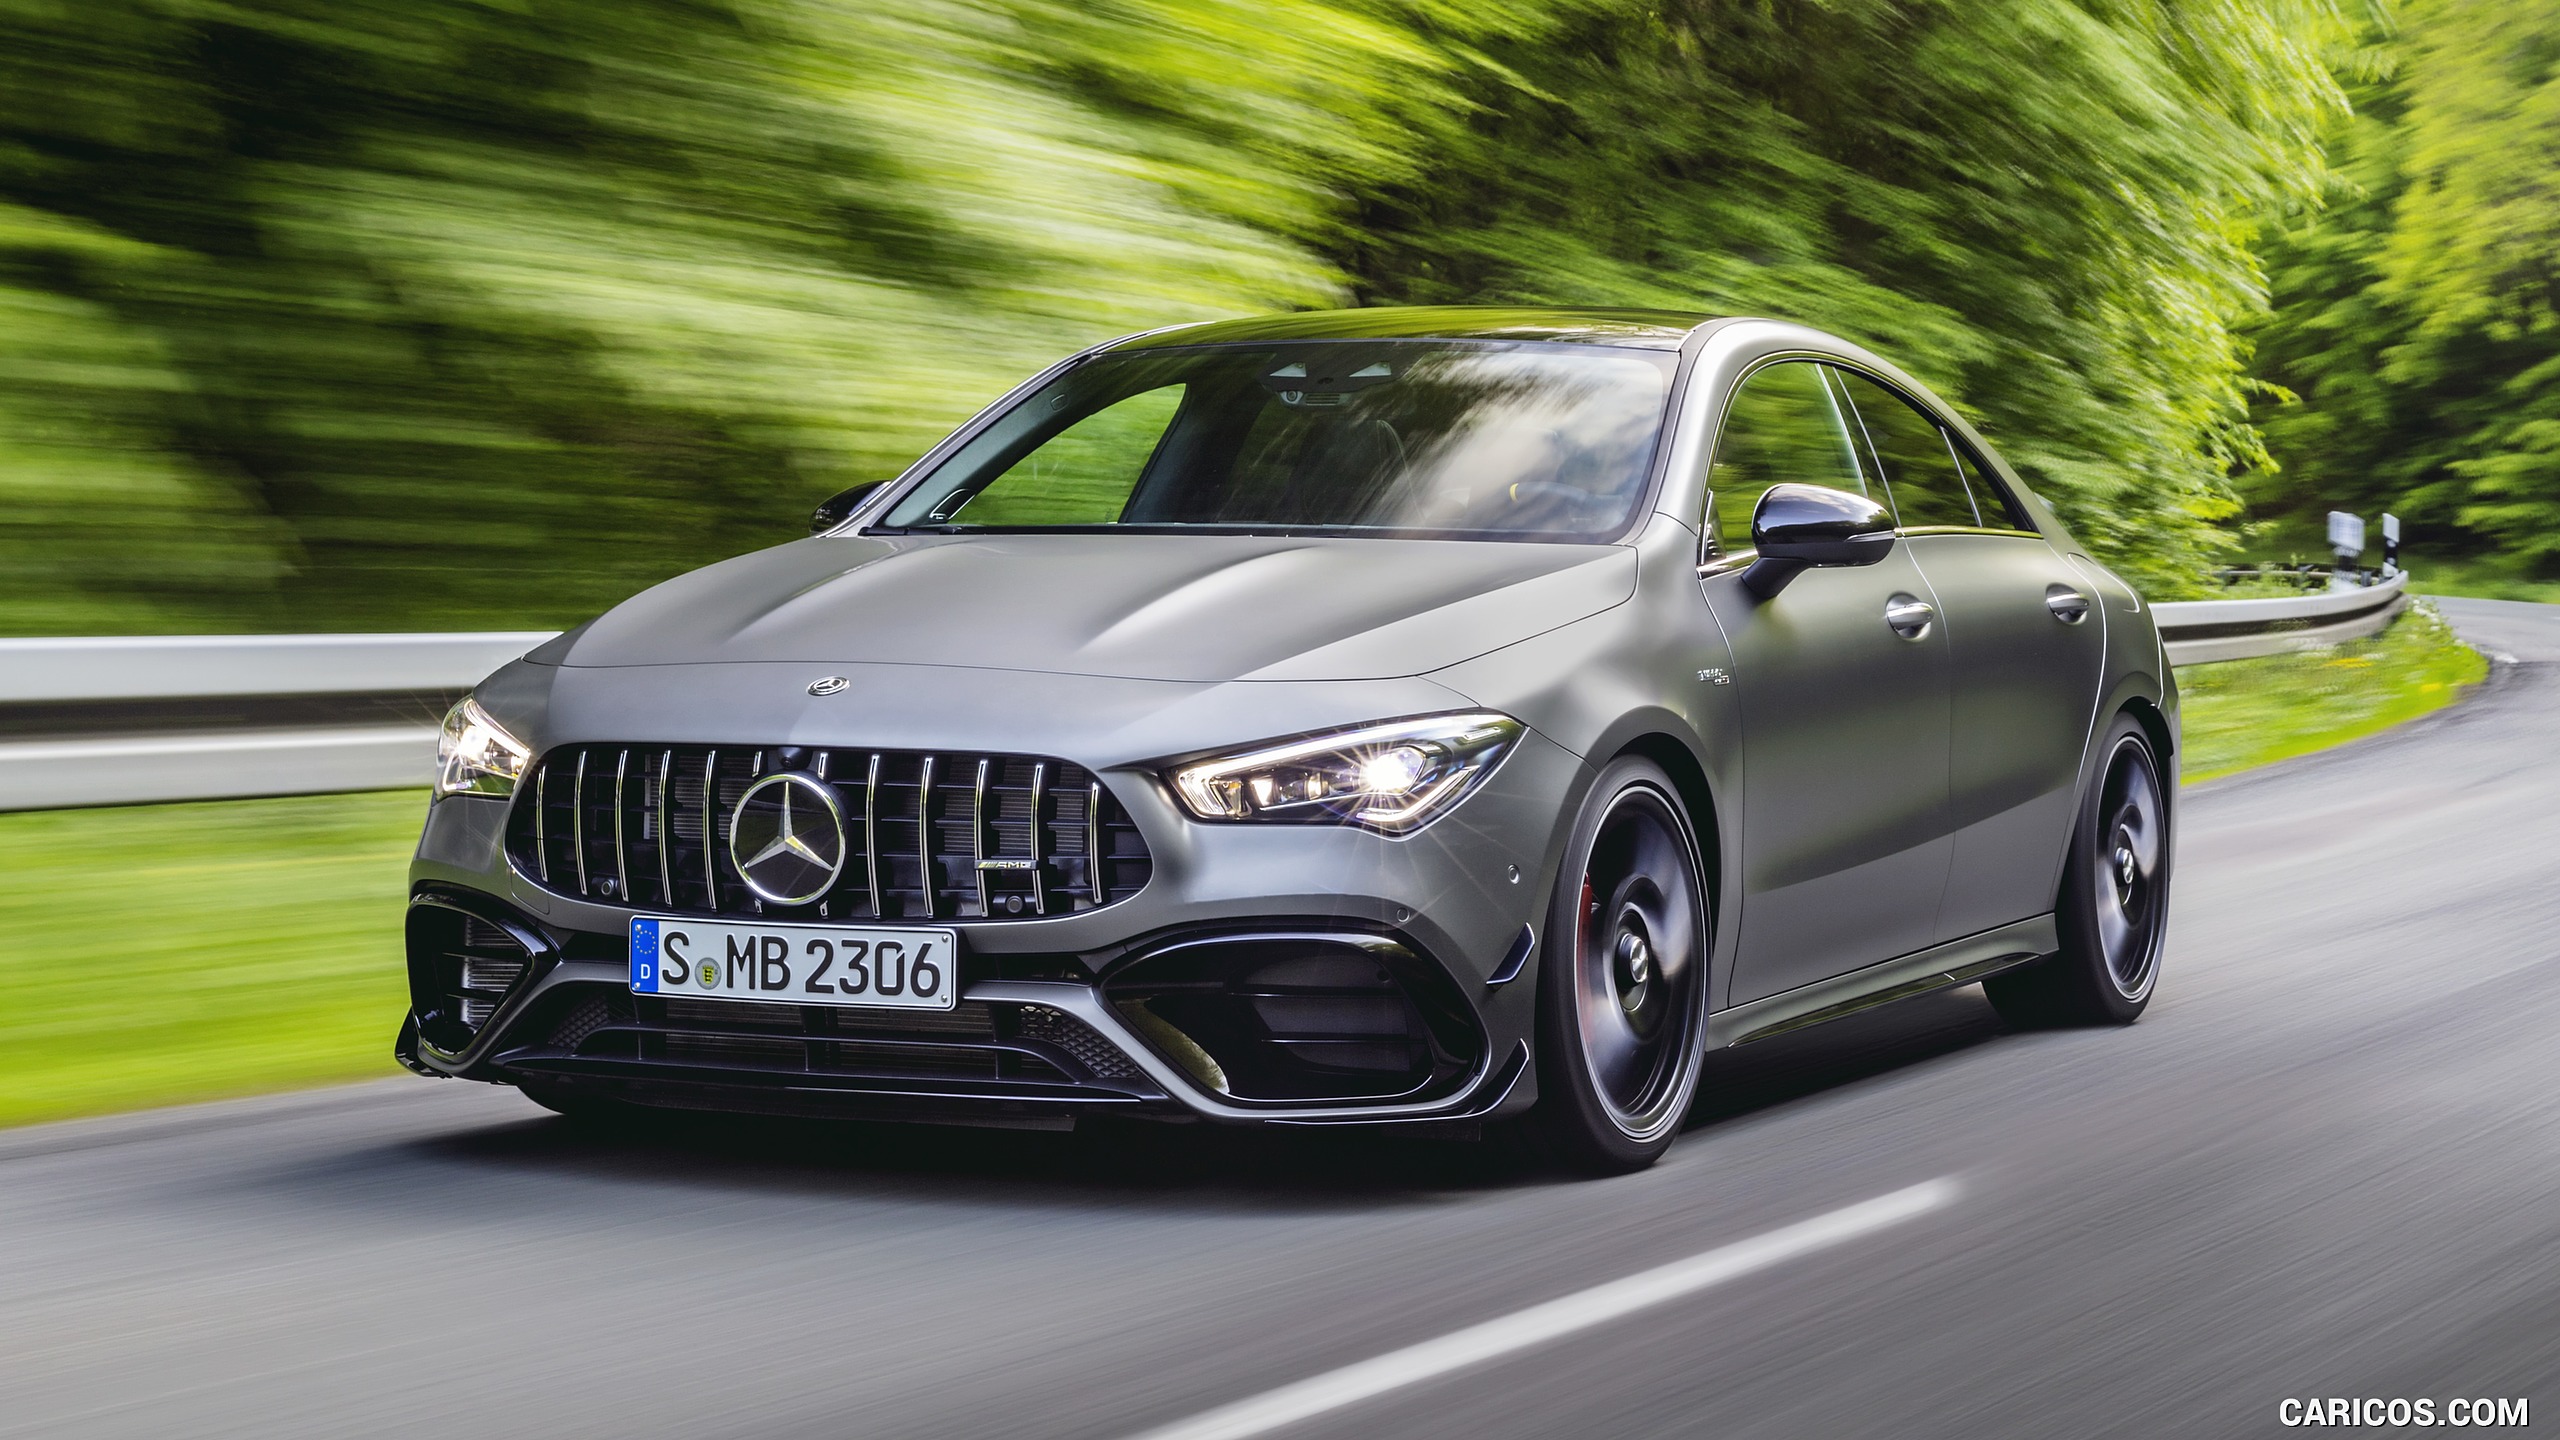 Broek Melodieus Oefening 2020 Mercedes-AMG CLA 45 | Caricos